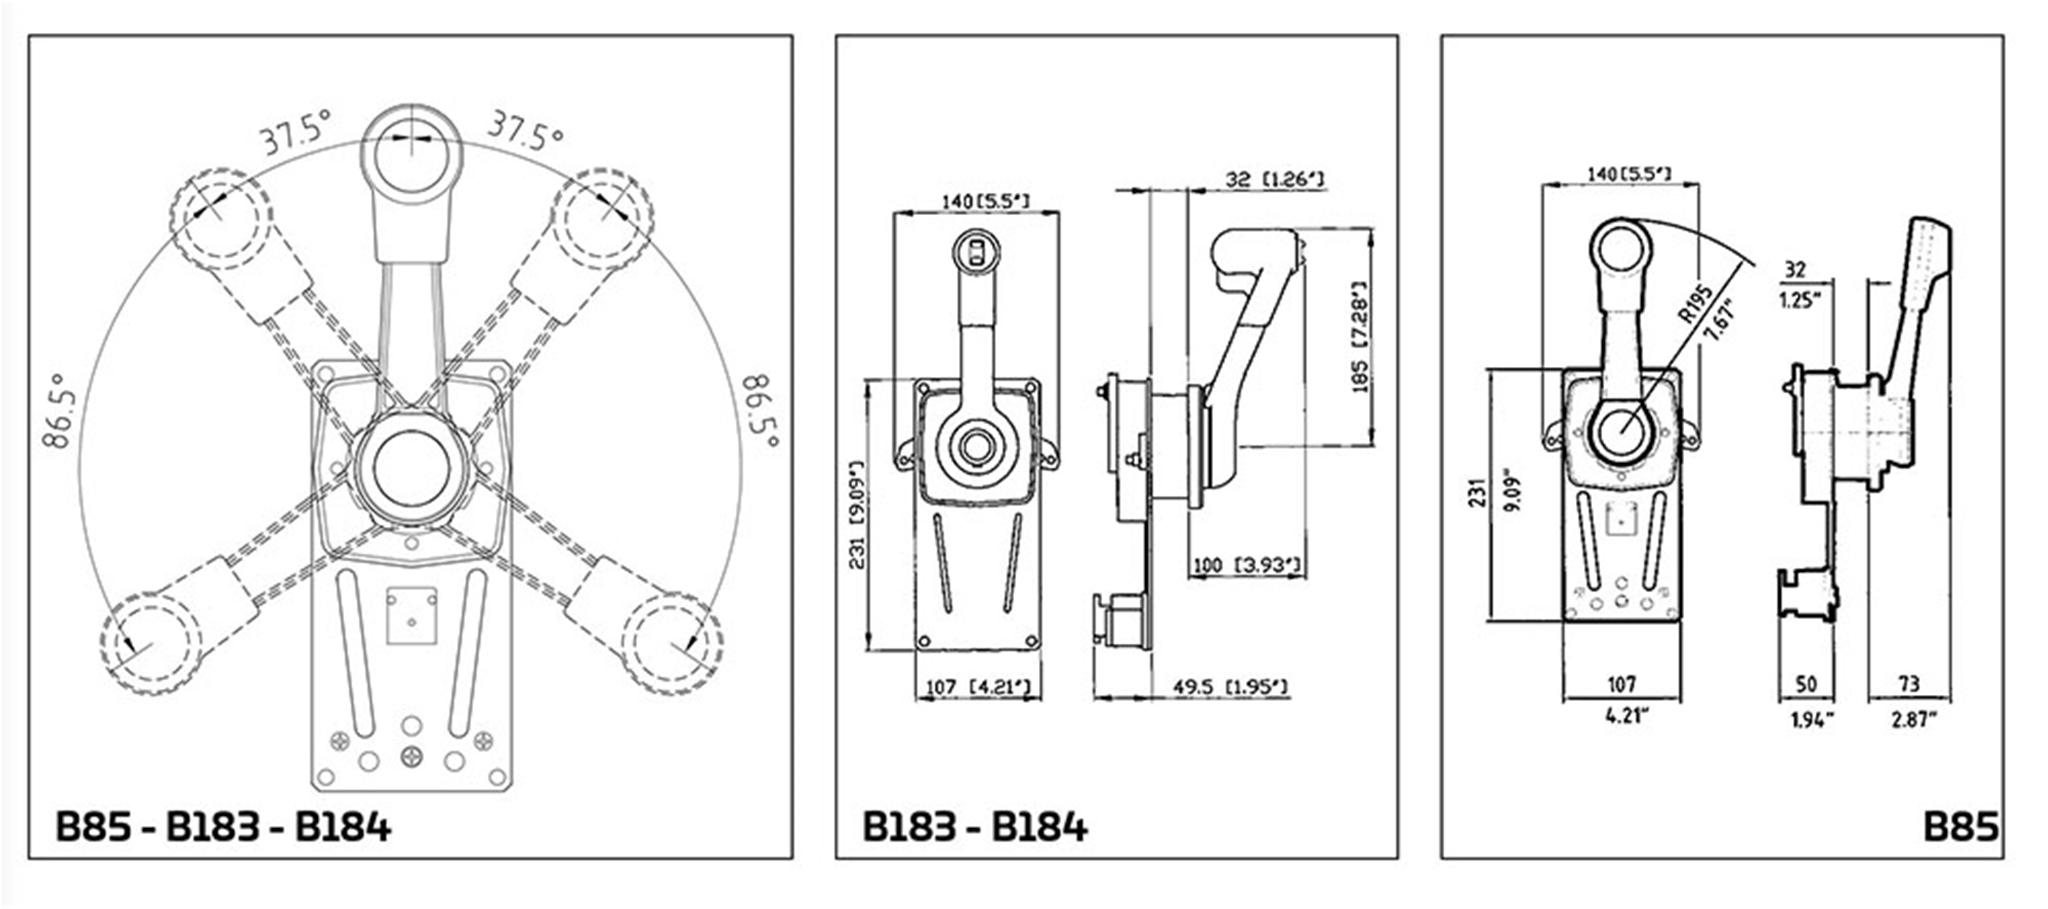 B183 Controller Specifications